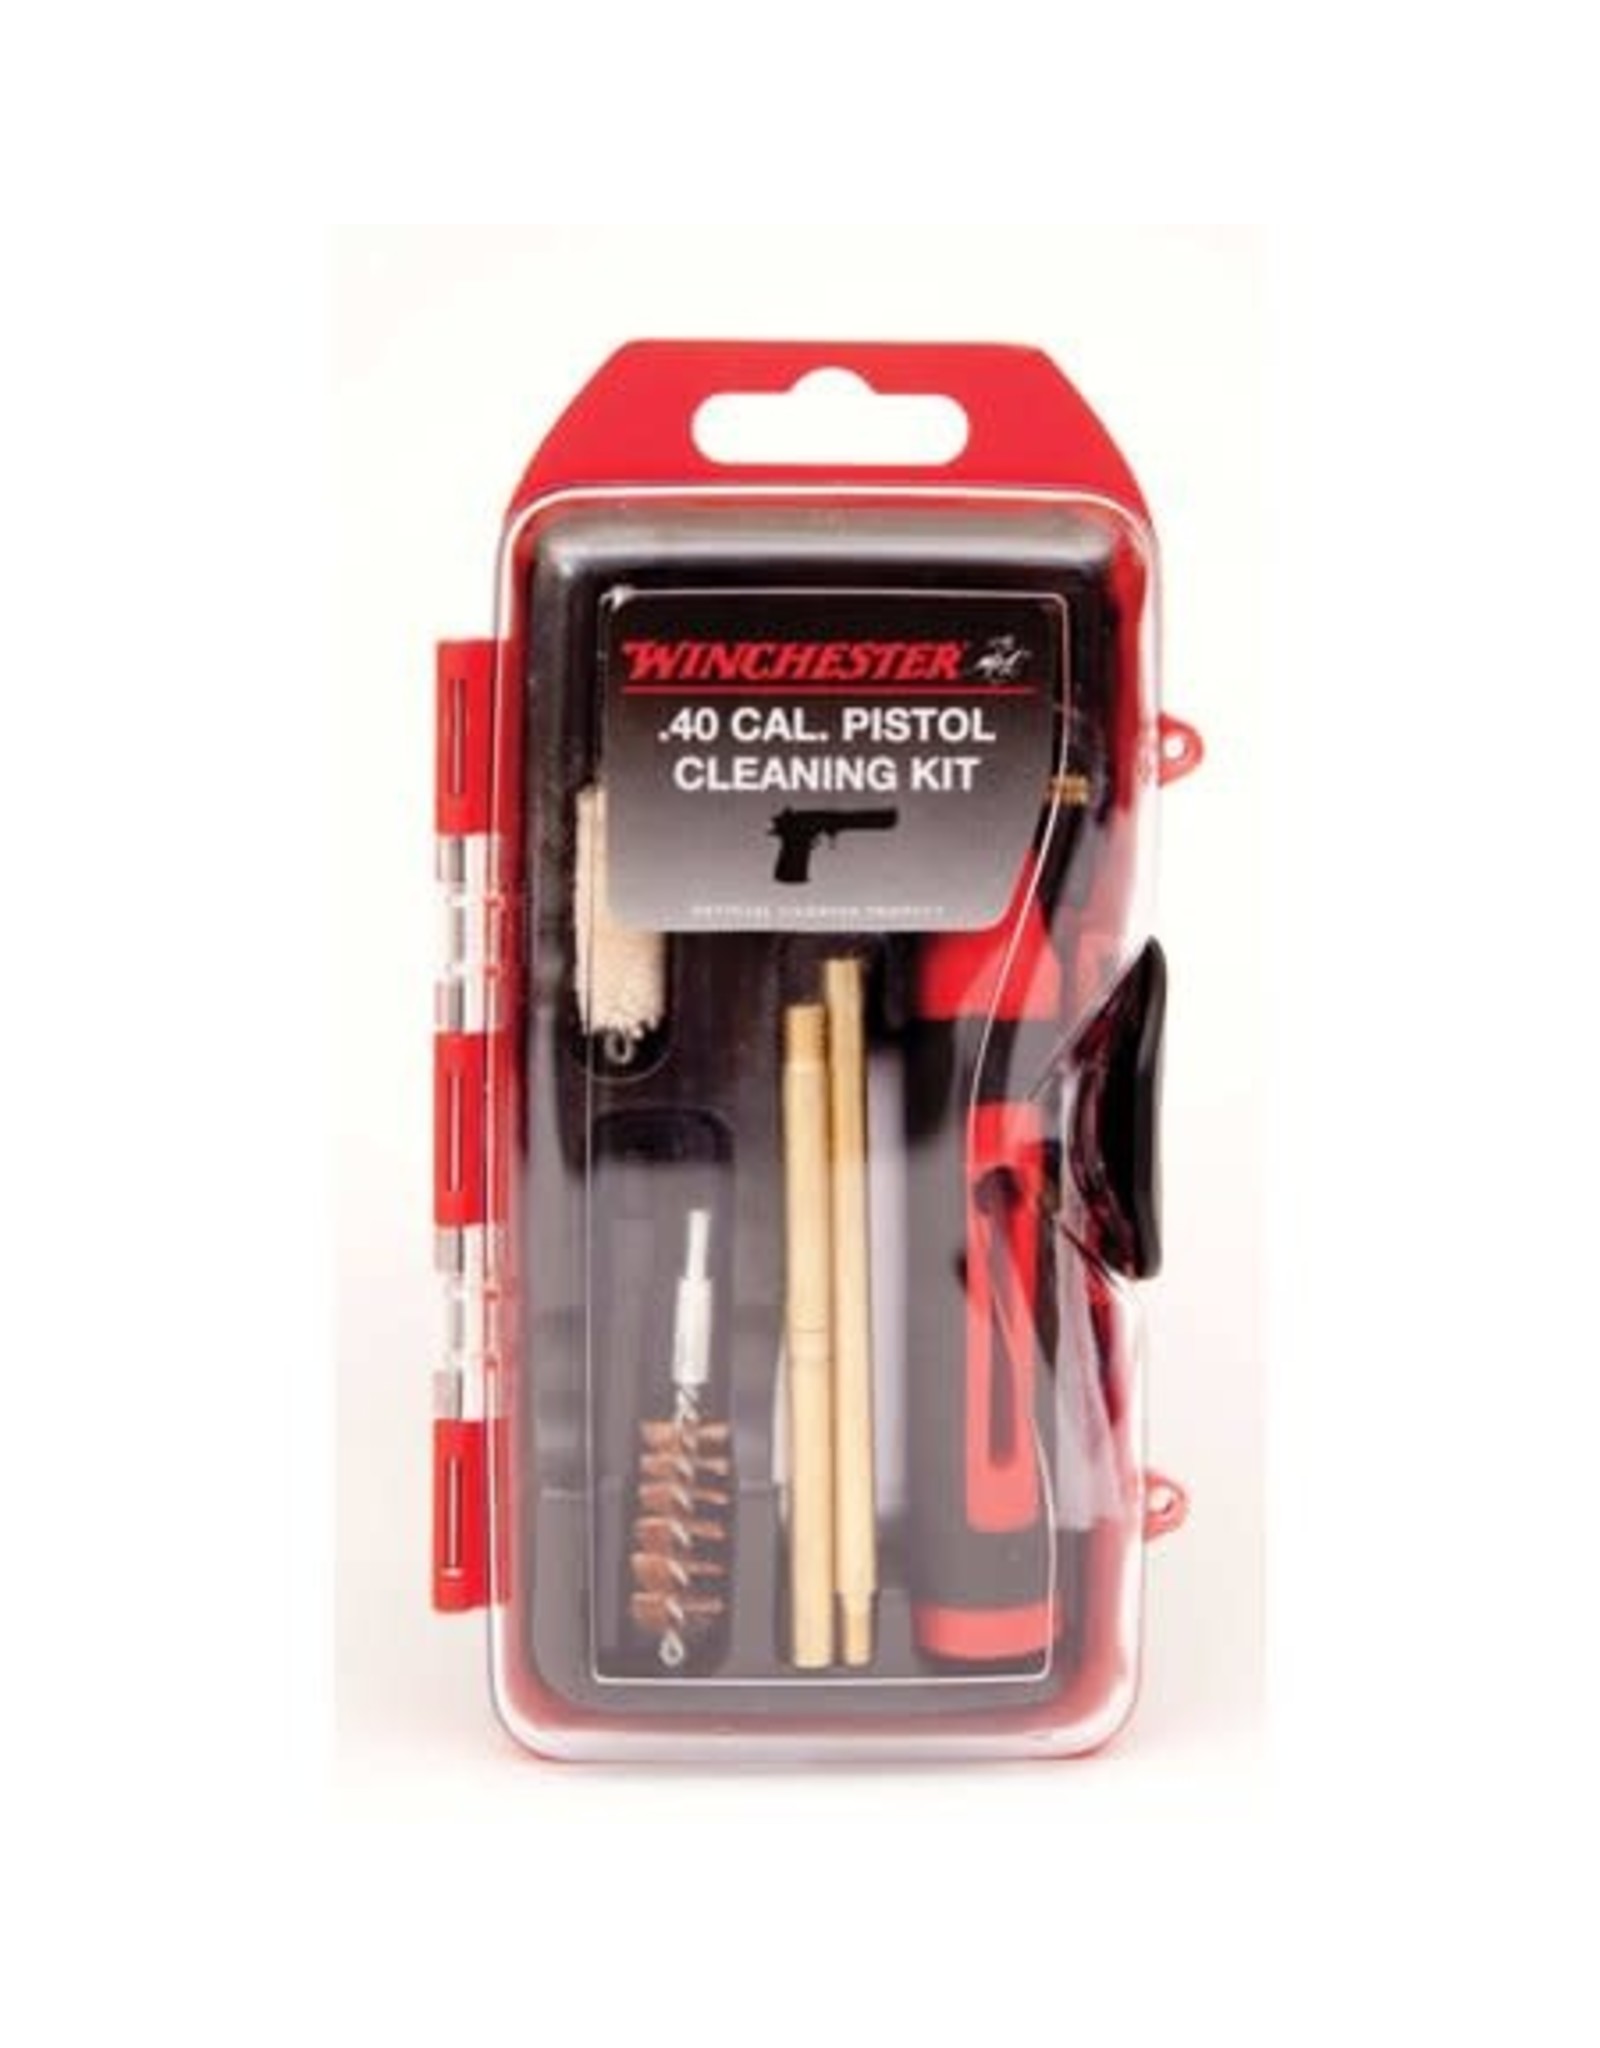 WINCHESTER WIN PISTOL CLEANING KIT 40 CAL